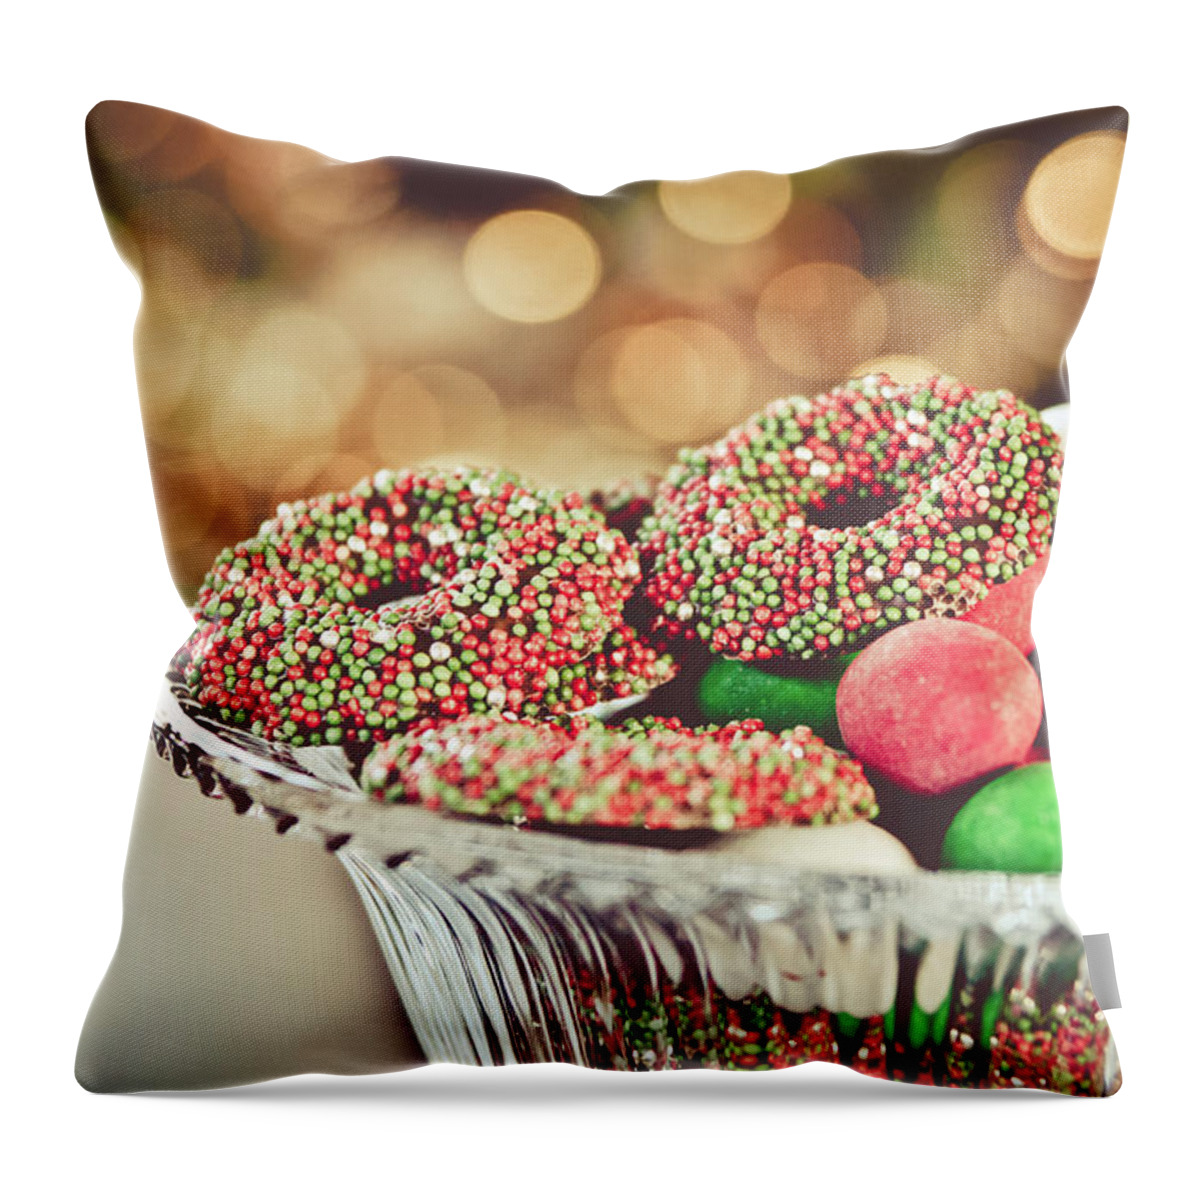 Celebration Throw Pillow featuring the photograph Christmas Chocolates And Sweets by Elly Schuurman